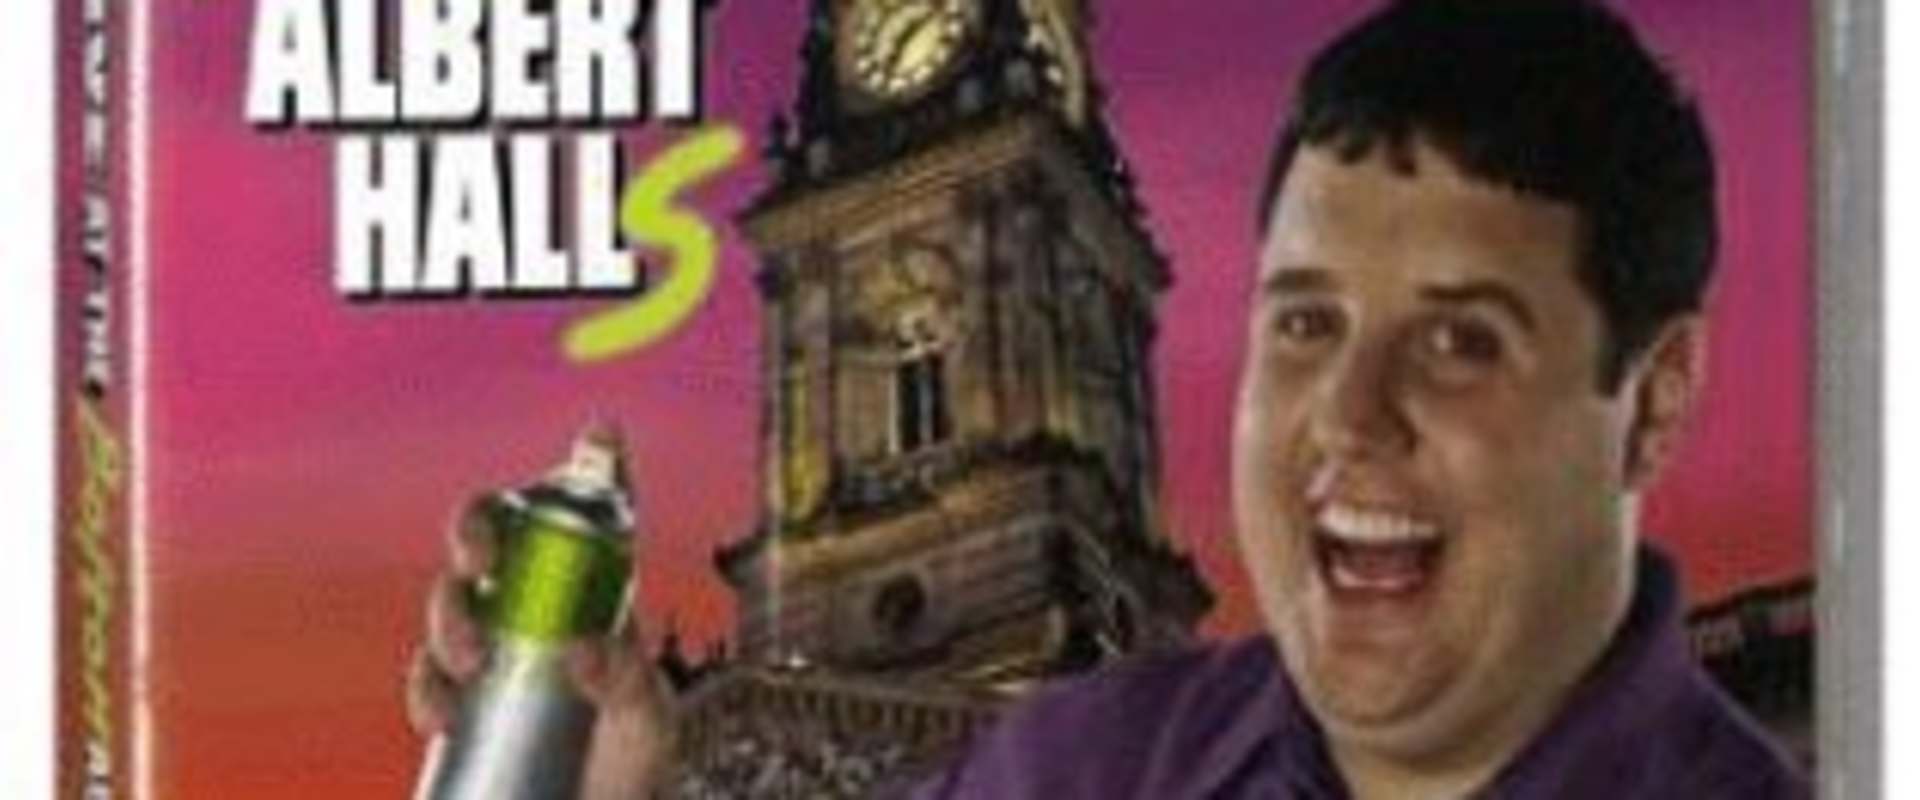 Peter Kay: Live at the Bolton Albert Halls background 1